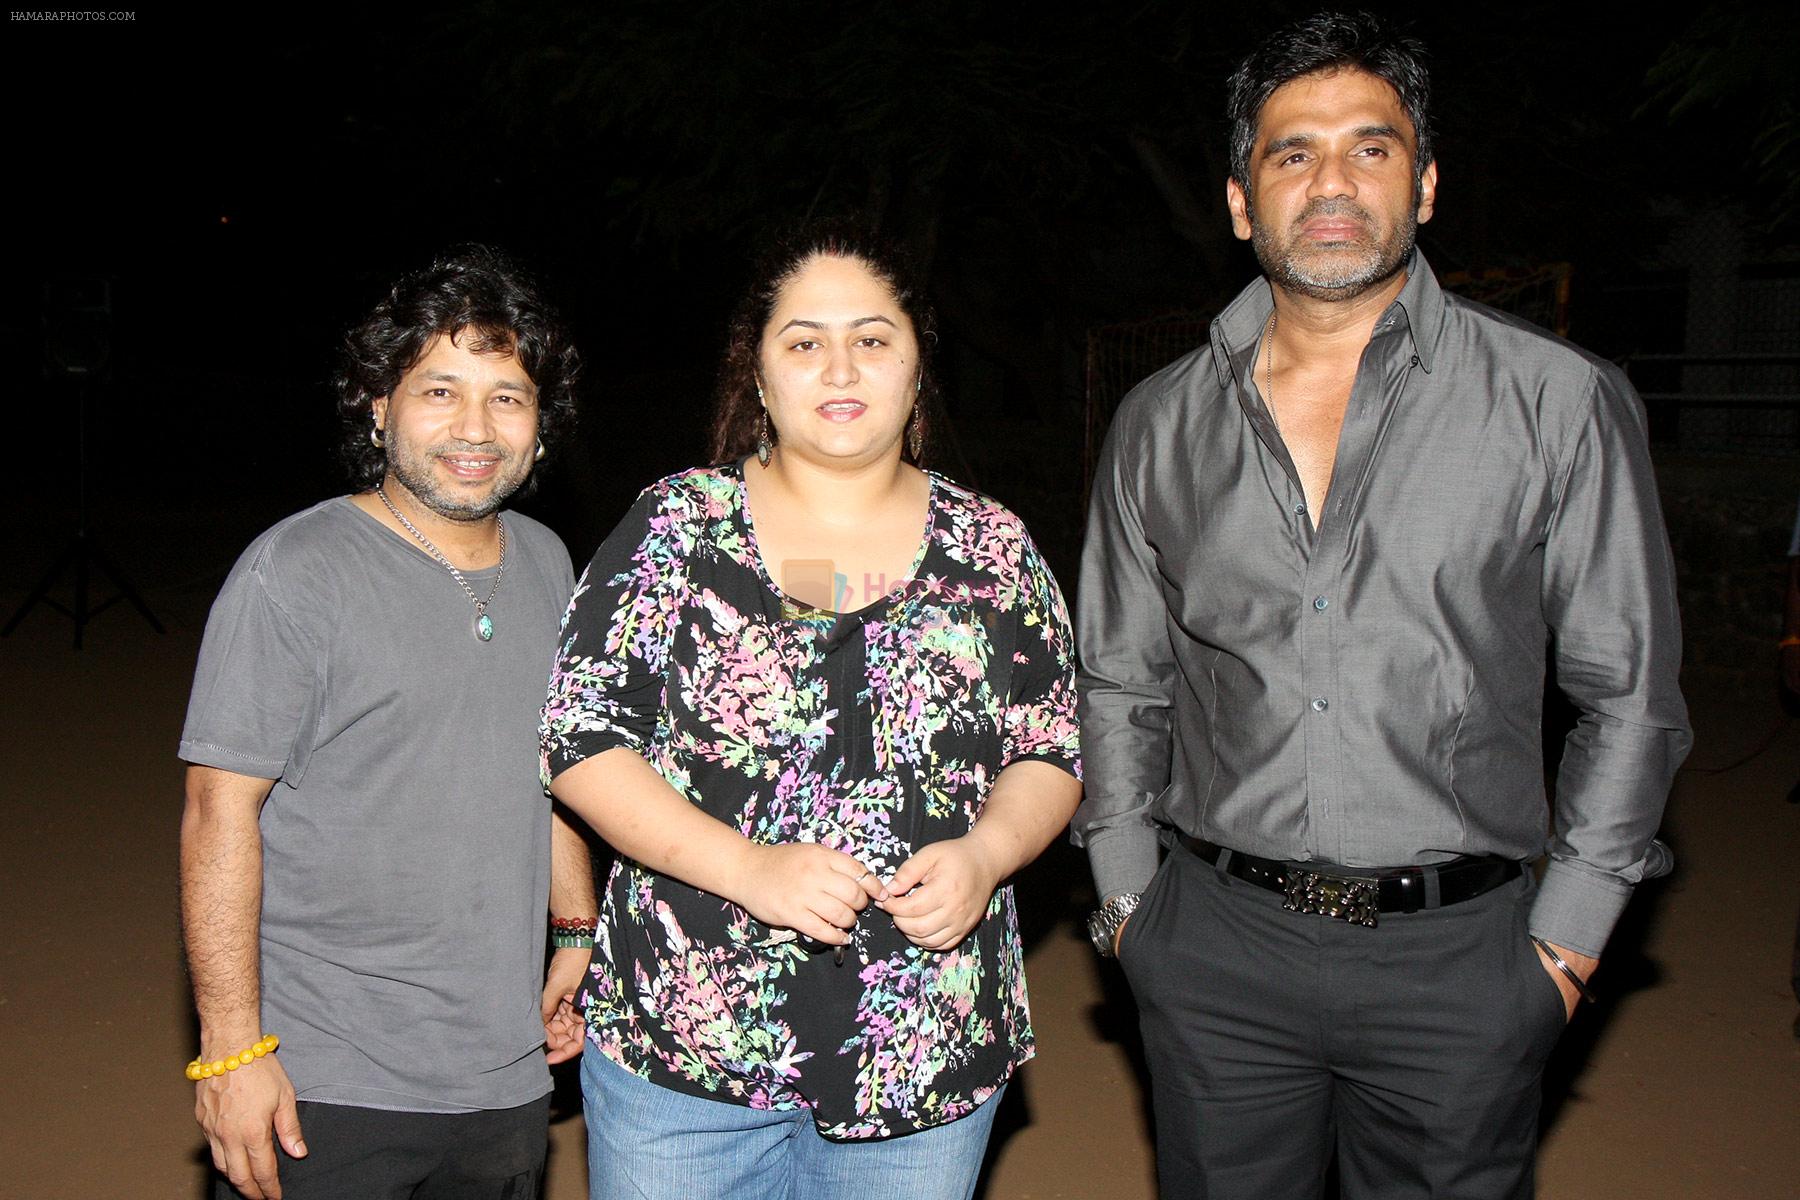 Kailash-Kher-with-his-wife-and-Sunil-Shetty at Cricket friendly match in Mumbai on 17th May 2013